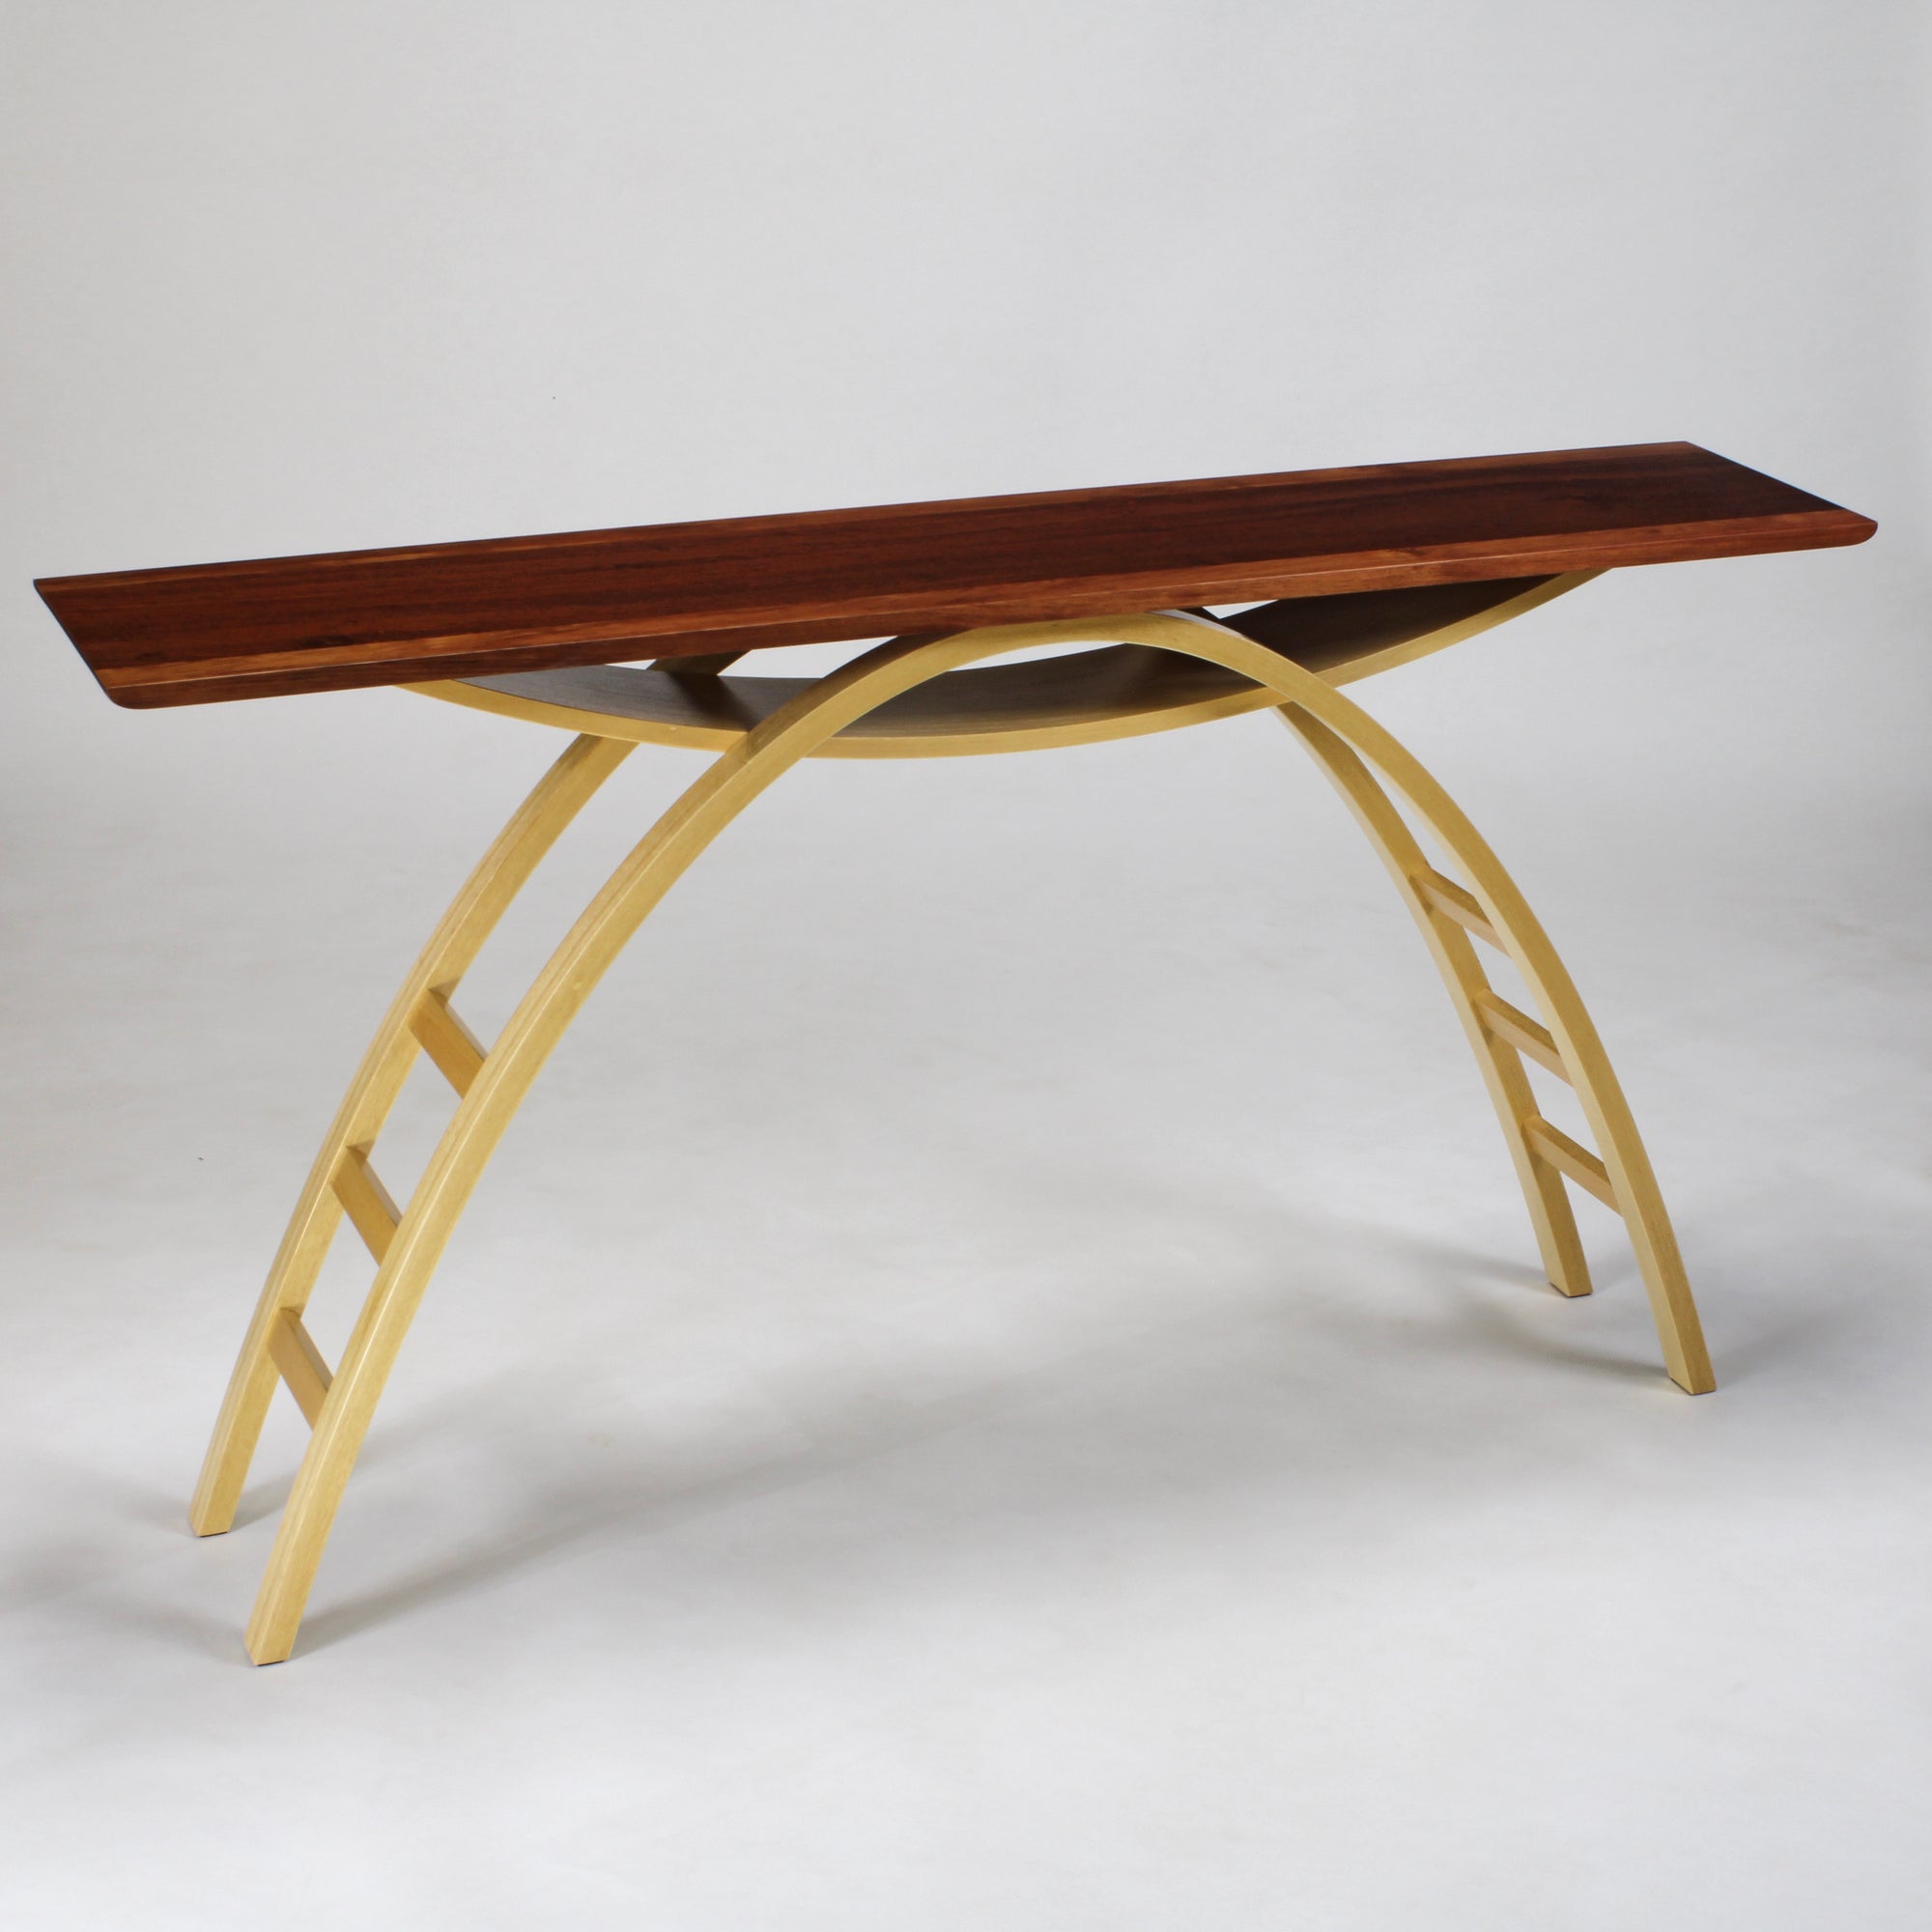 A hall table with arched leg structure